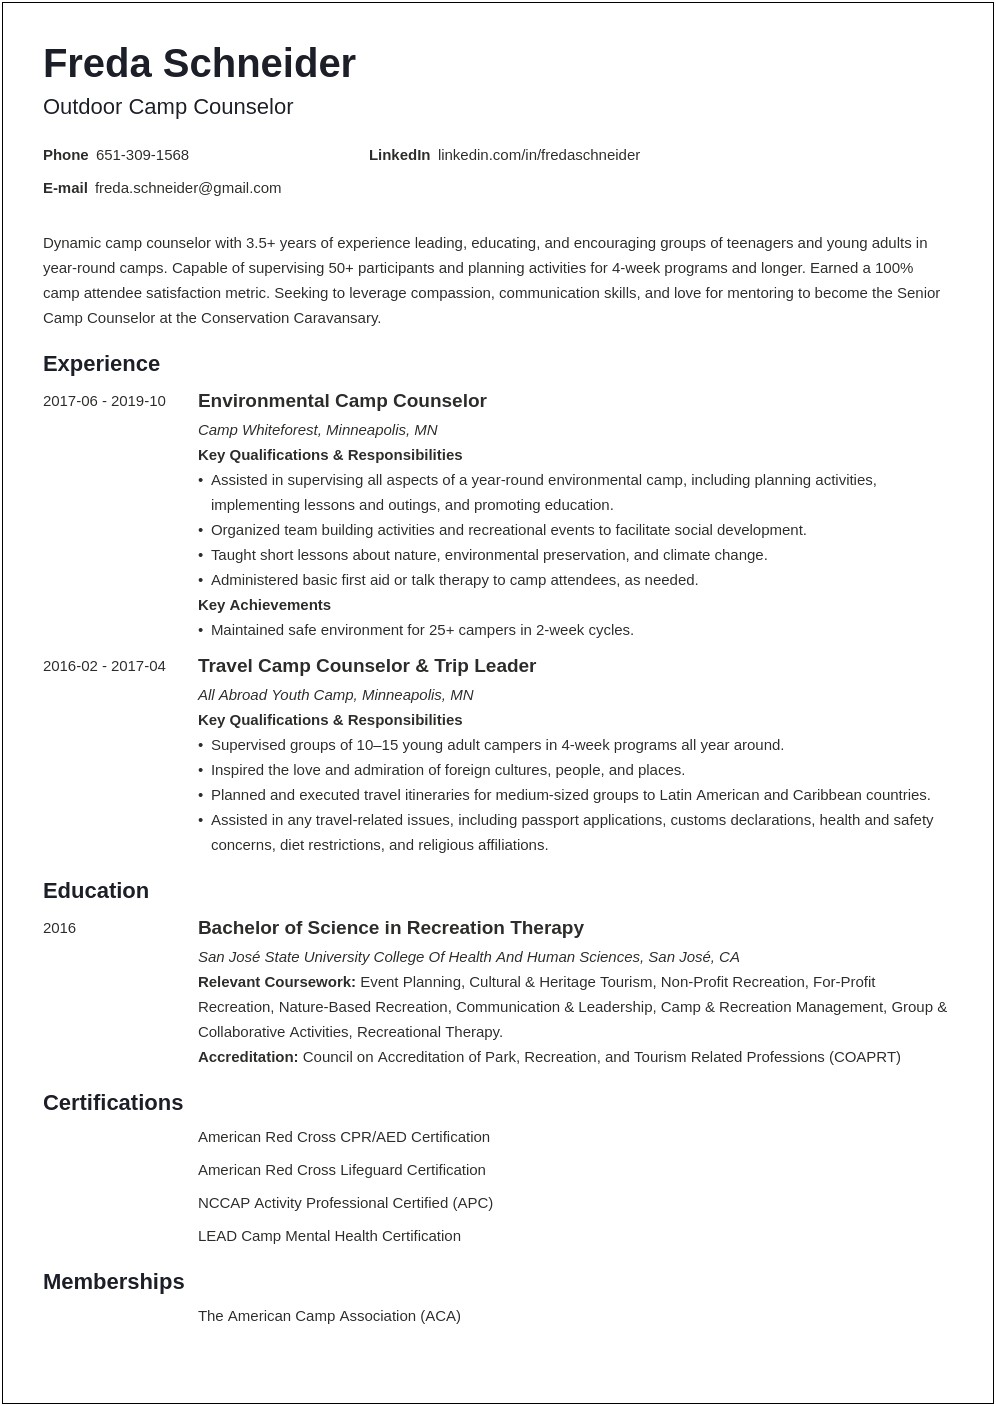 Resume For Camp Counselor Job